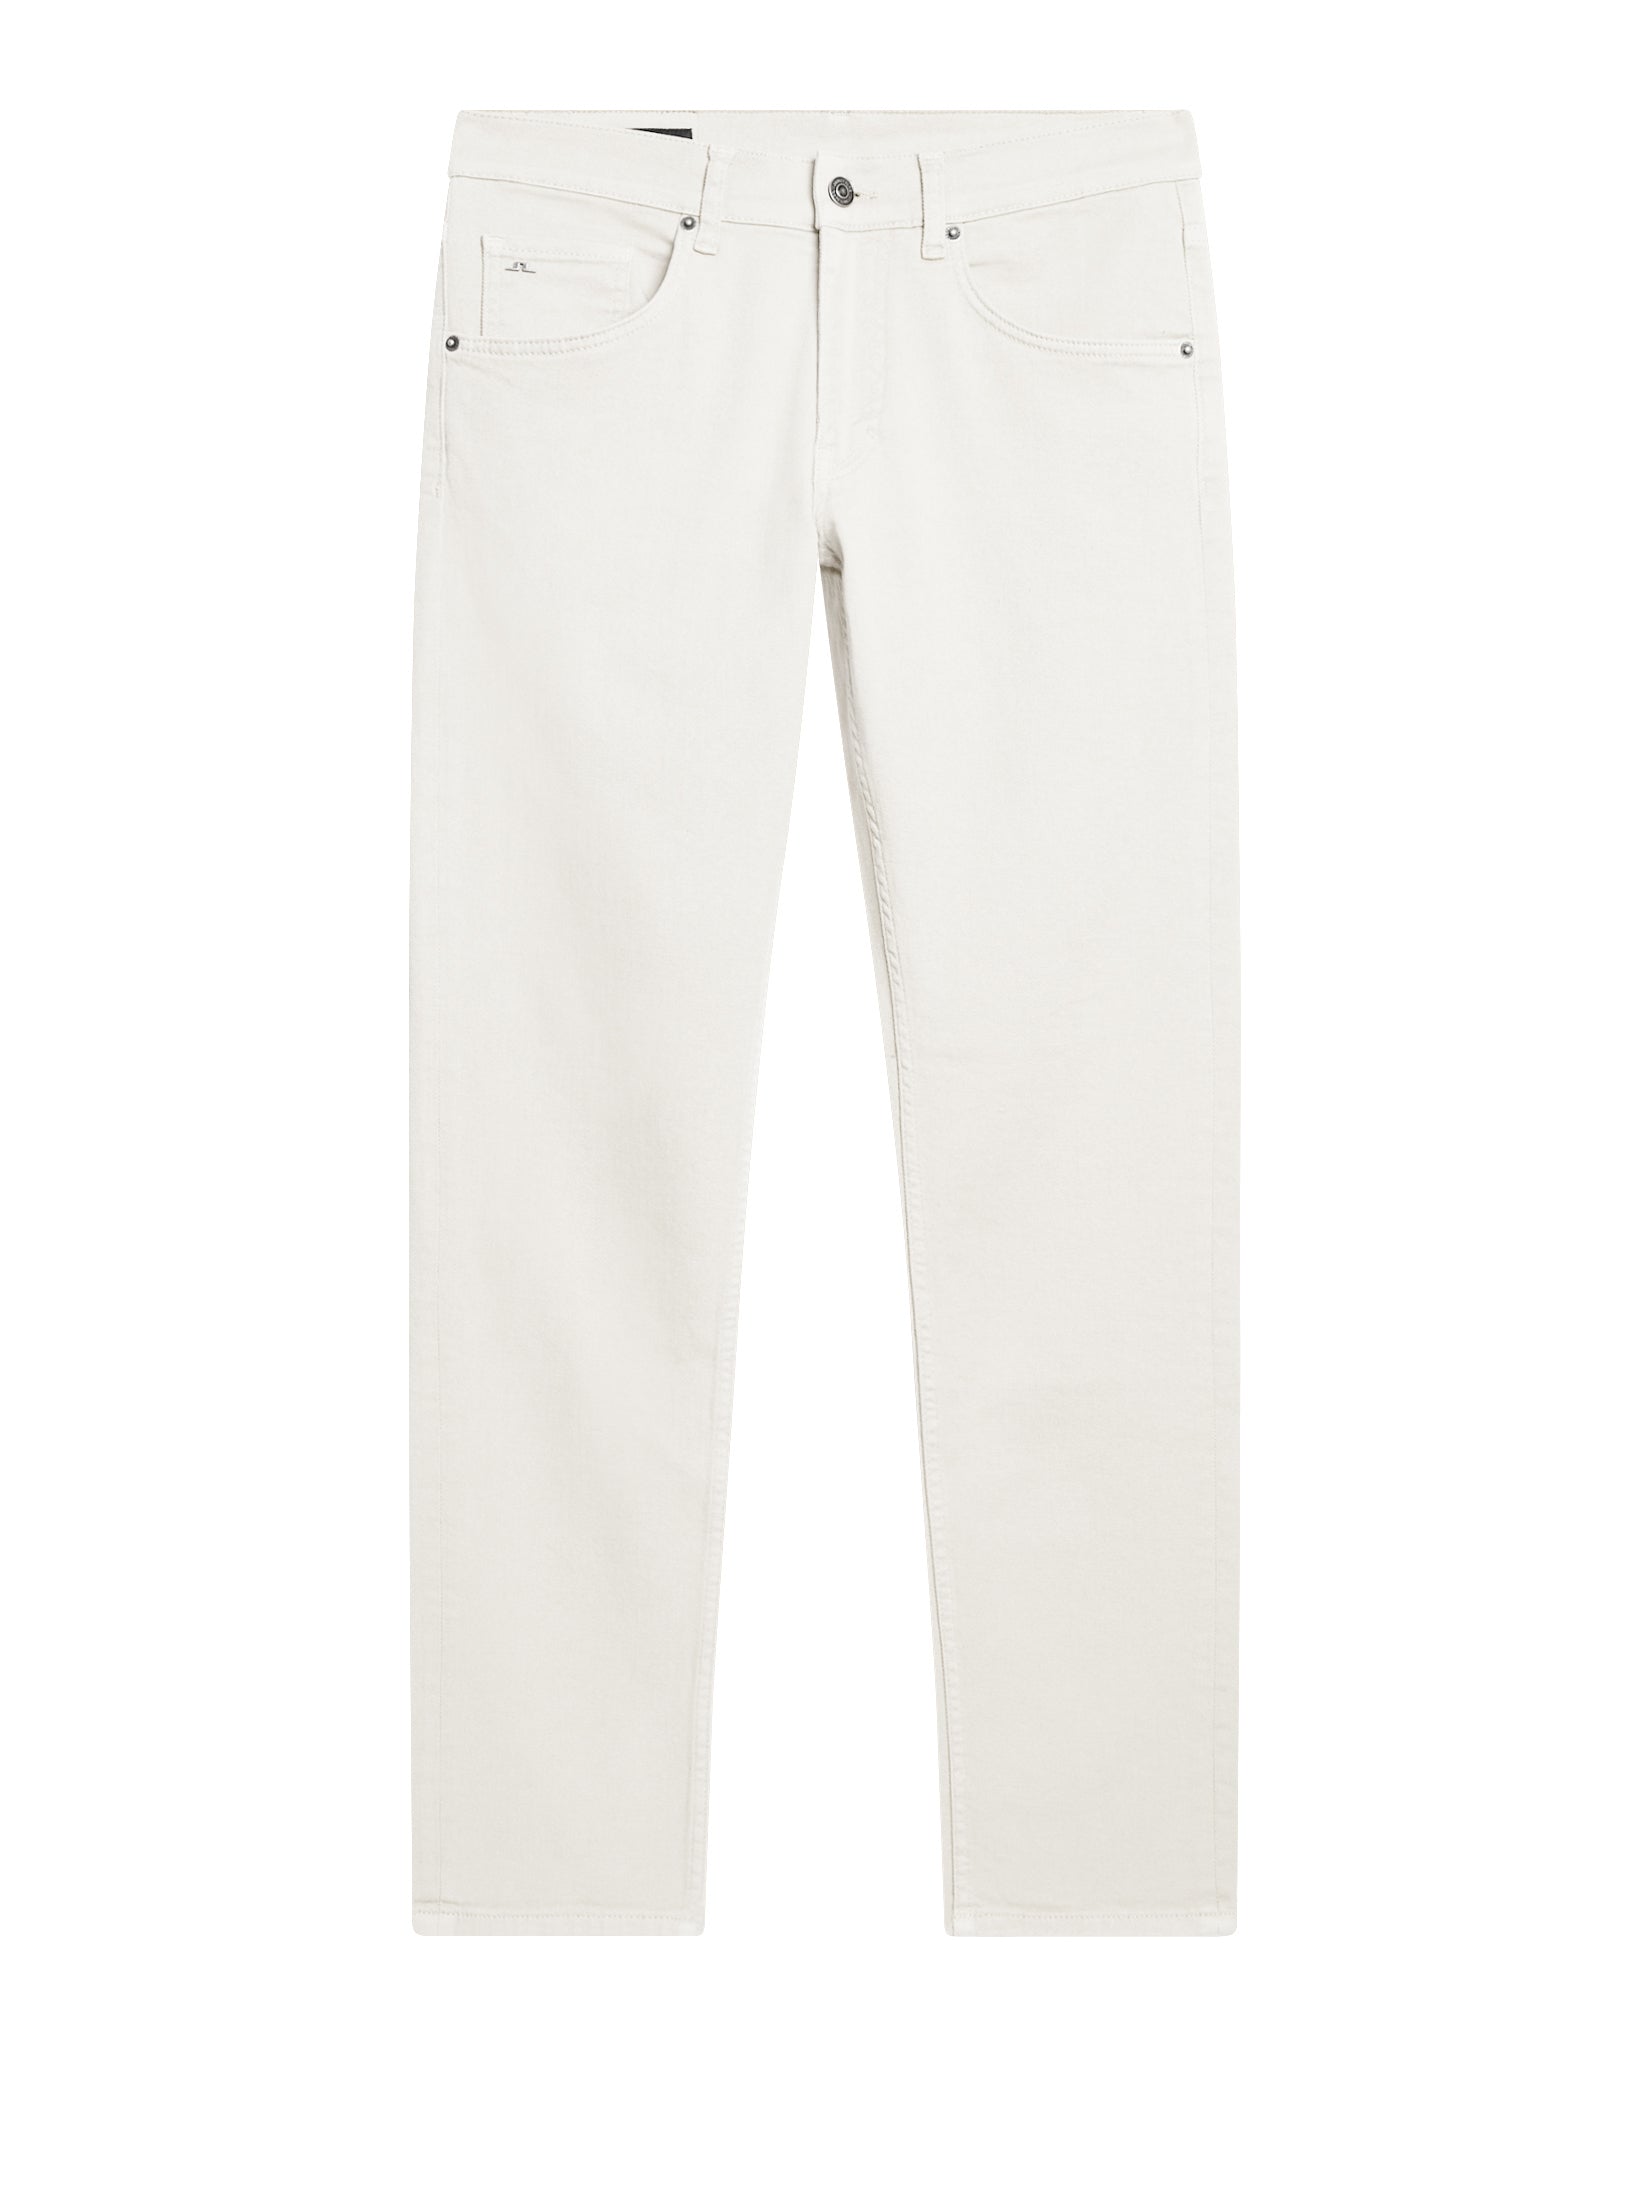 Jay Solid Stretch LHT Jeans / Cloud White – J.Lindeberg